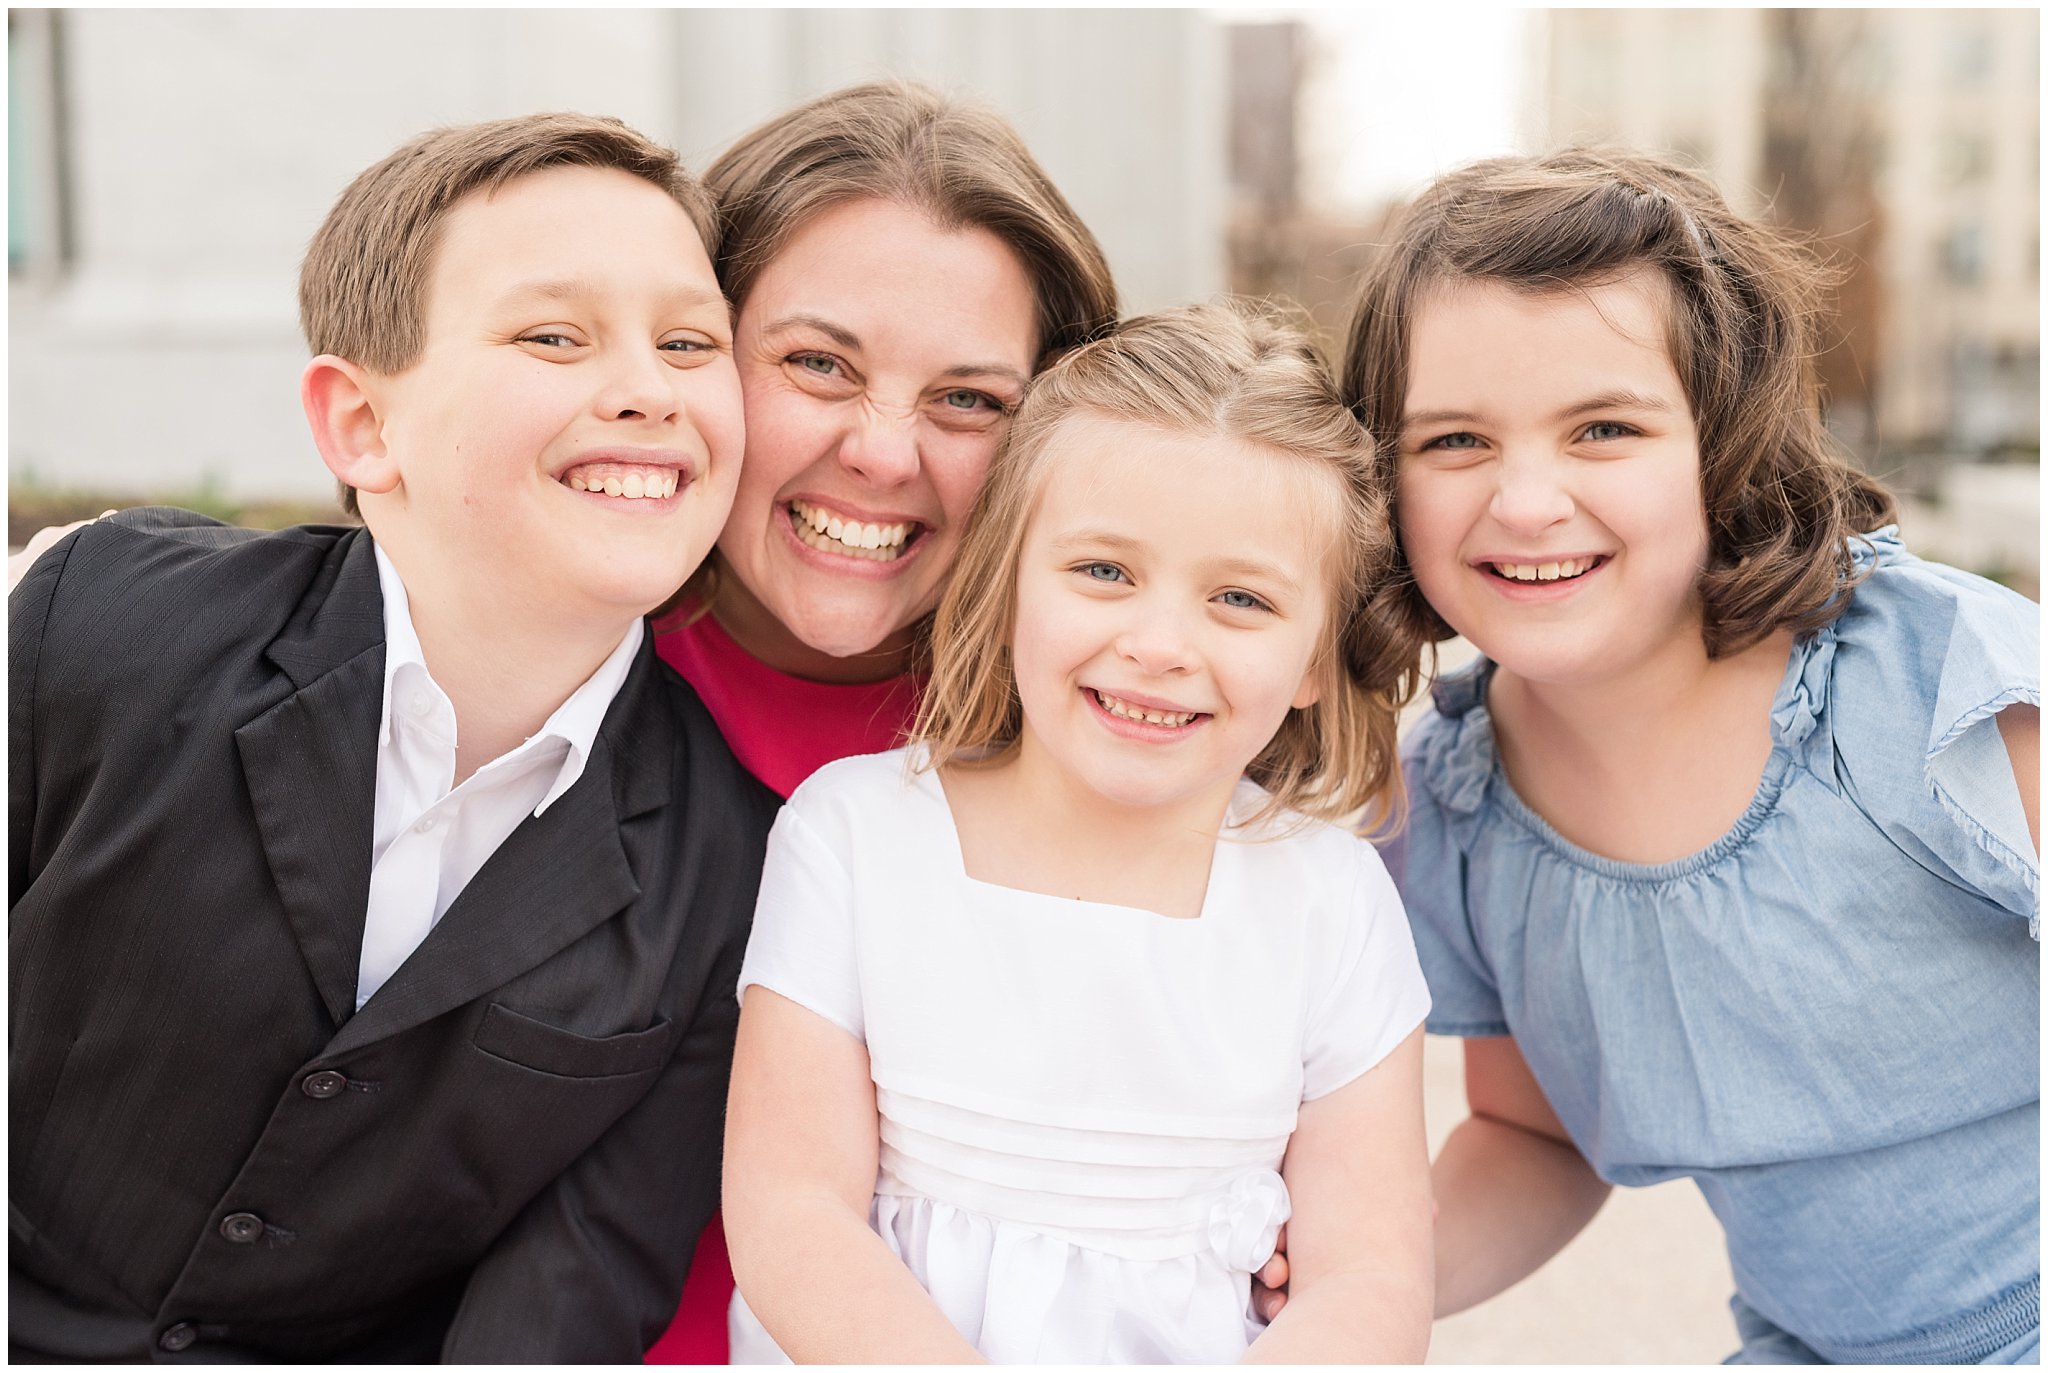 Candid, fun, happy family picture laughing | Salt Lake Temple Sealing | Jessie and Dallin Photography